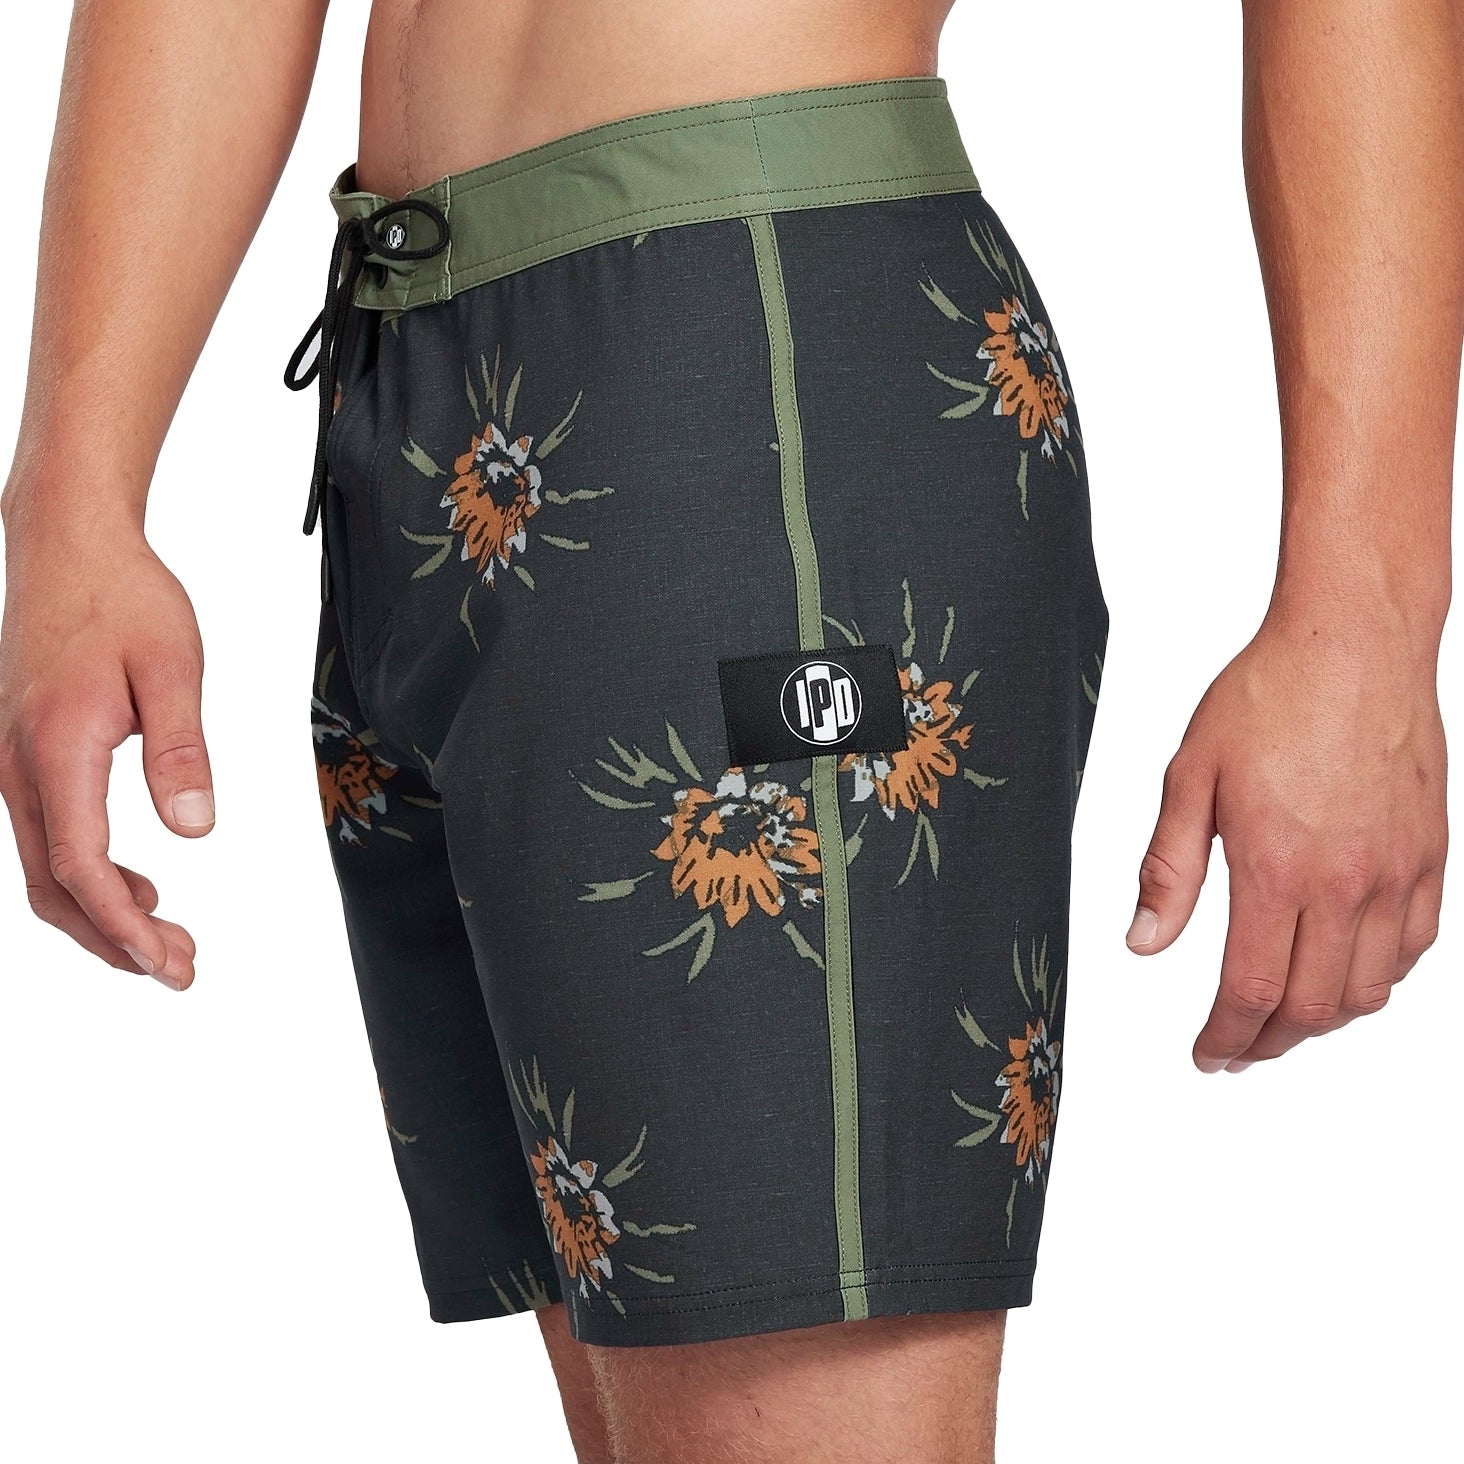 Black boardshorts with green trim and floral pattern front.